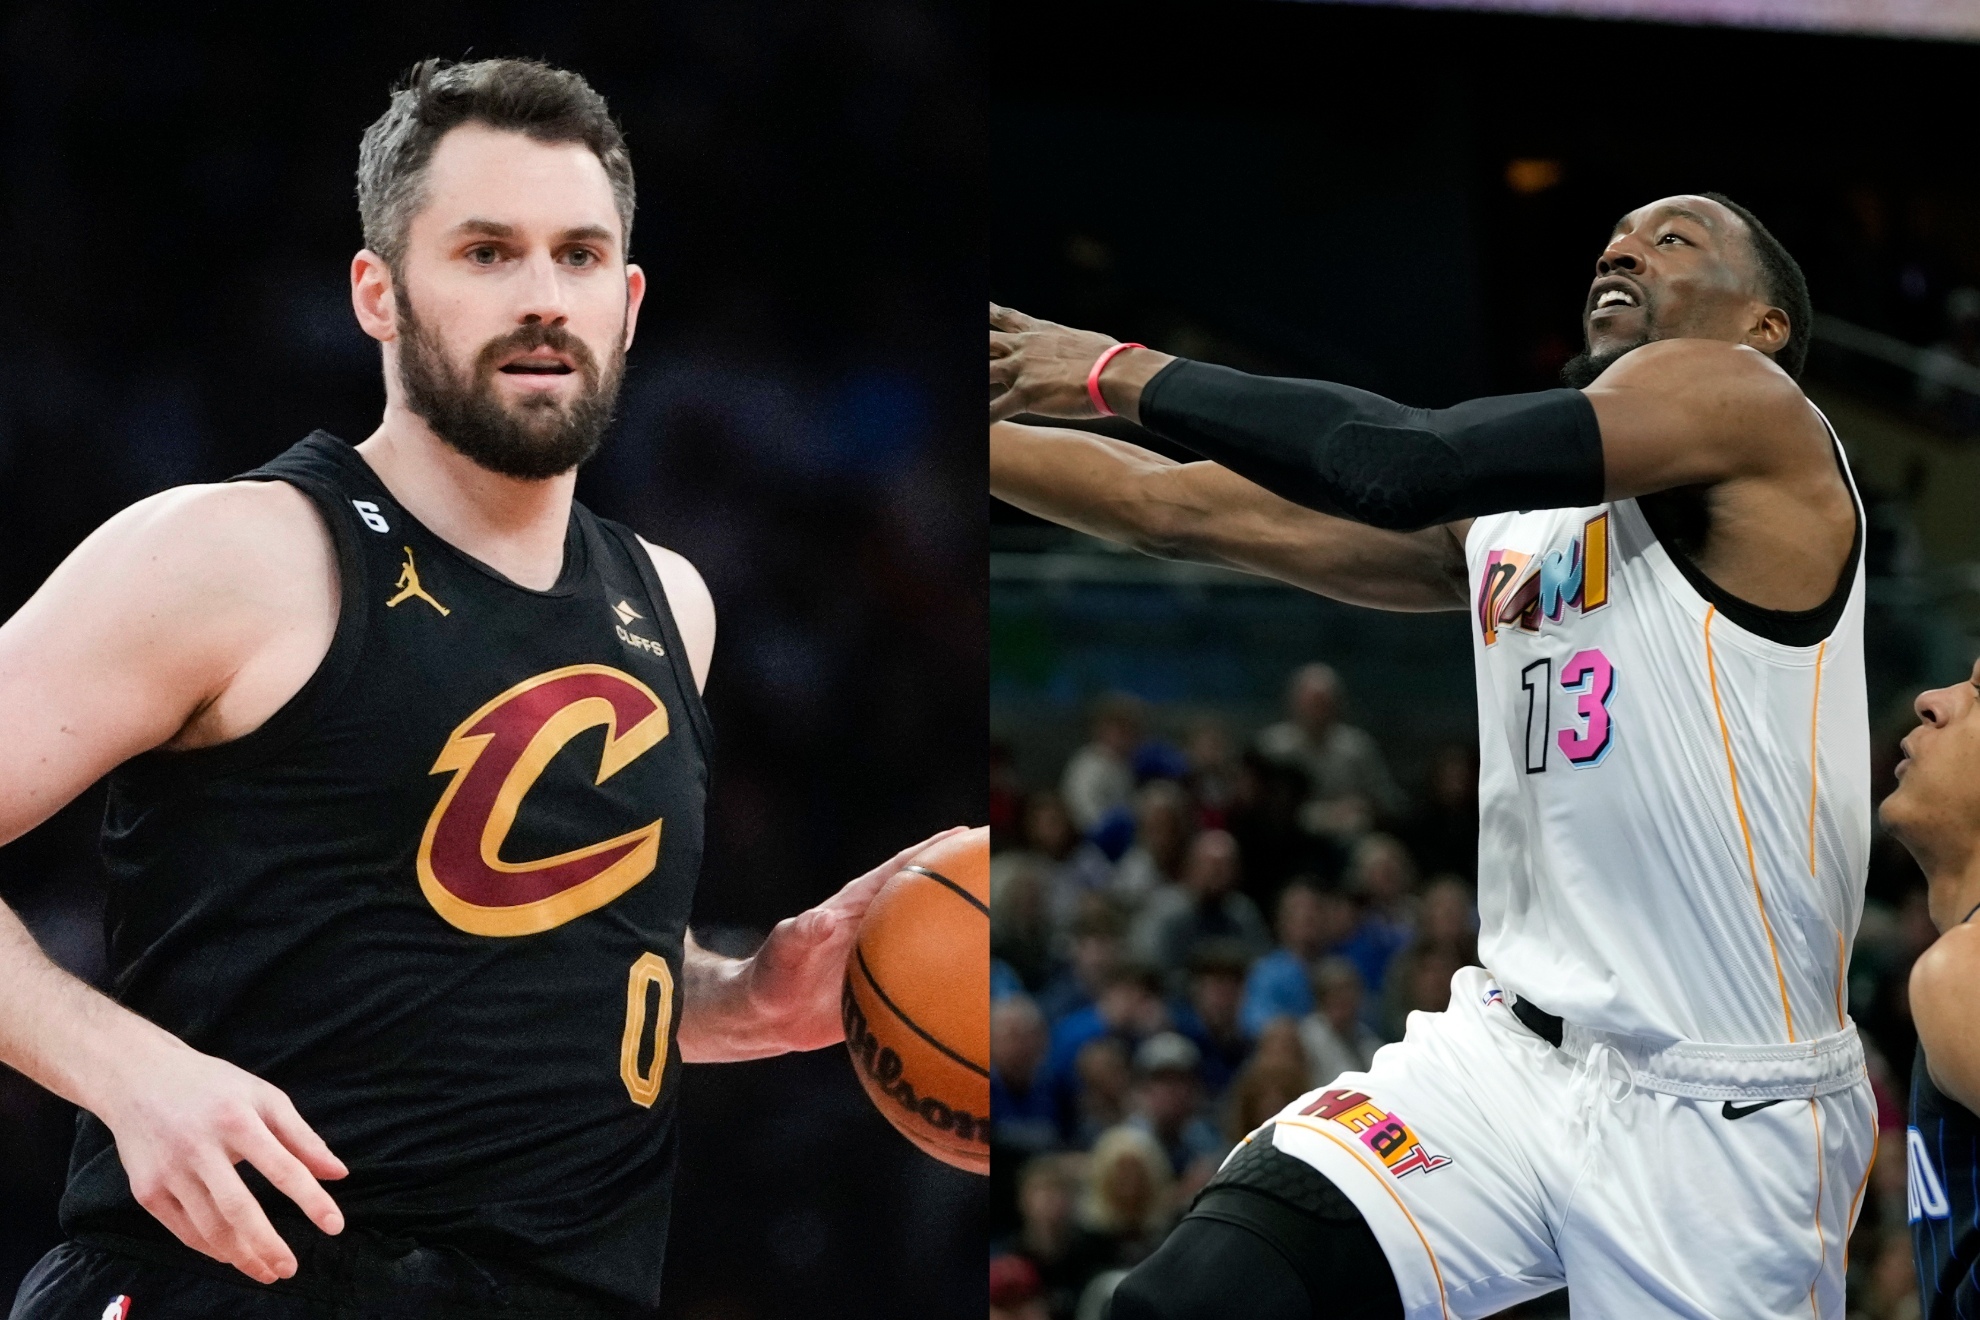 Beef in Miami Heat as Kevin Love and Bam Adebayo get in heated IG exchange  | Marca